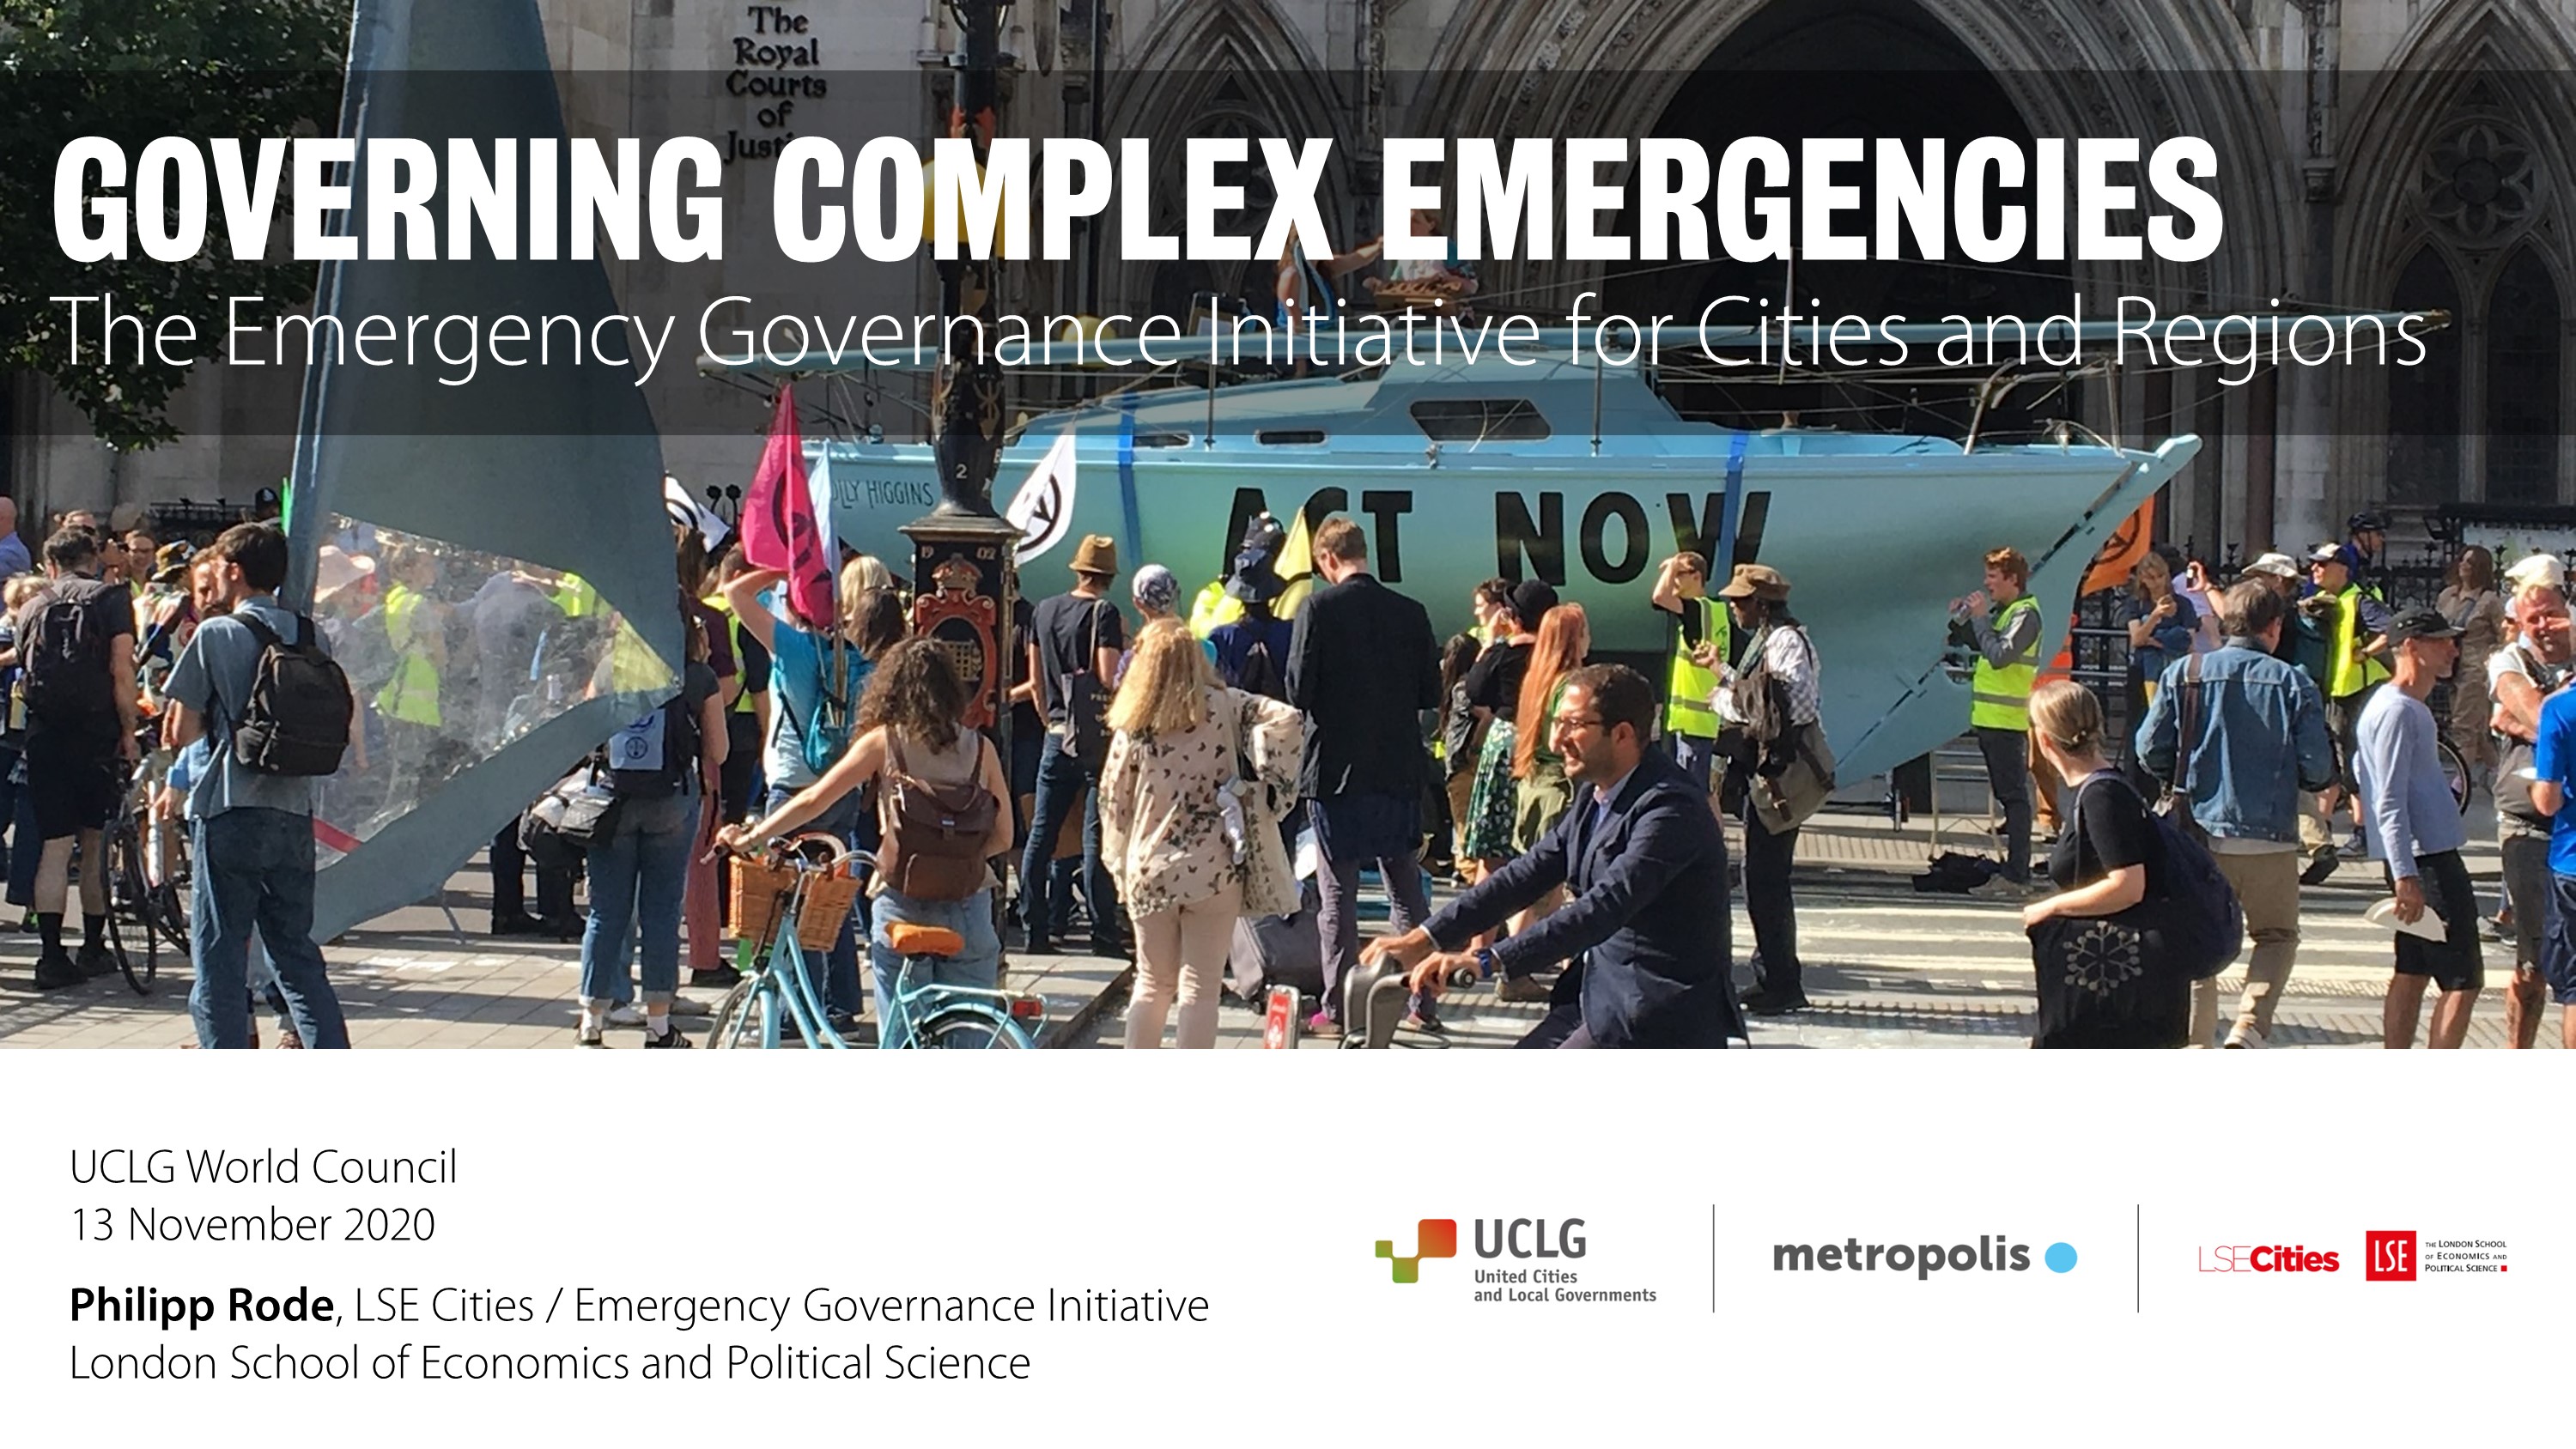 Watch Philipp Rode's presentation on Governing Complex Emergencies